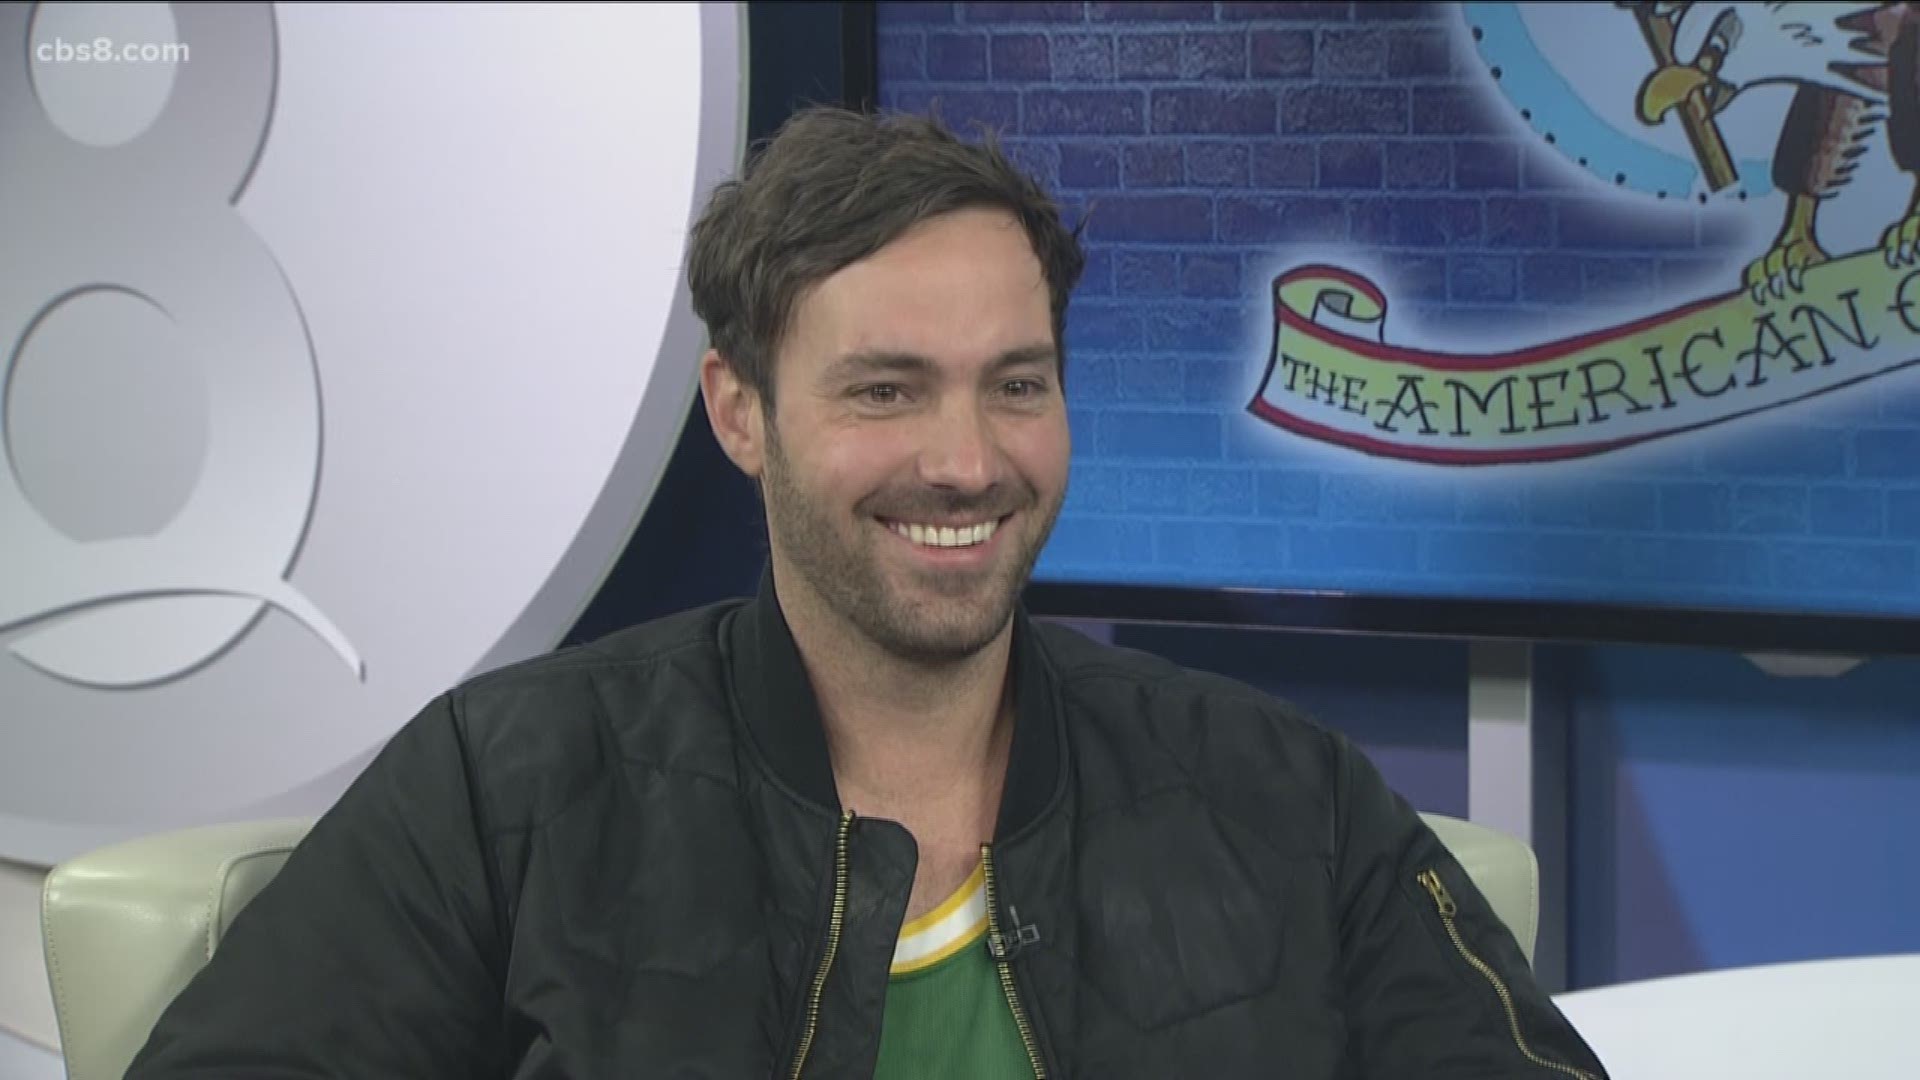 Catch Jeff Dye at American Comedy Company  on Friday and Saturday night with shows at 7:30 p.m. and 9 p.m.